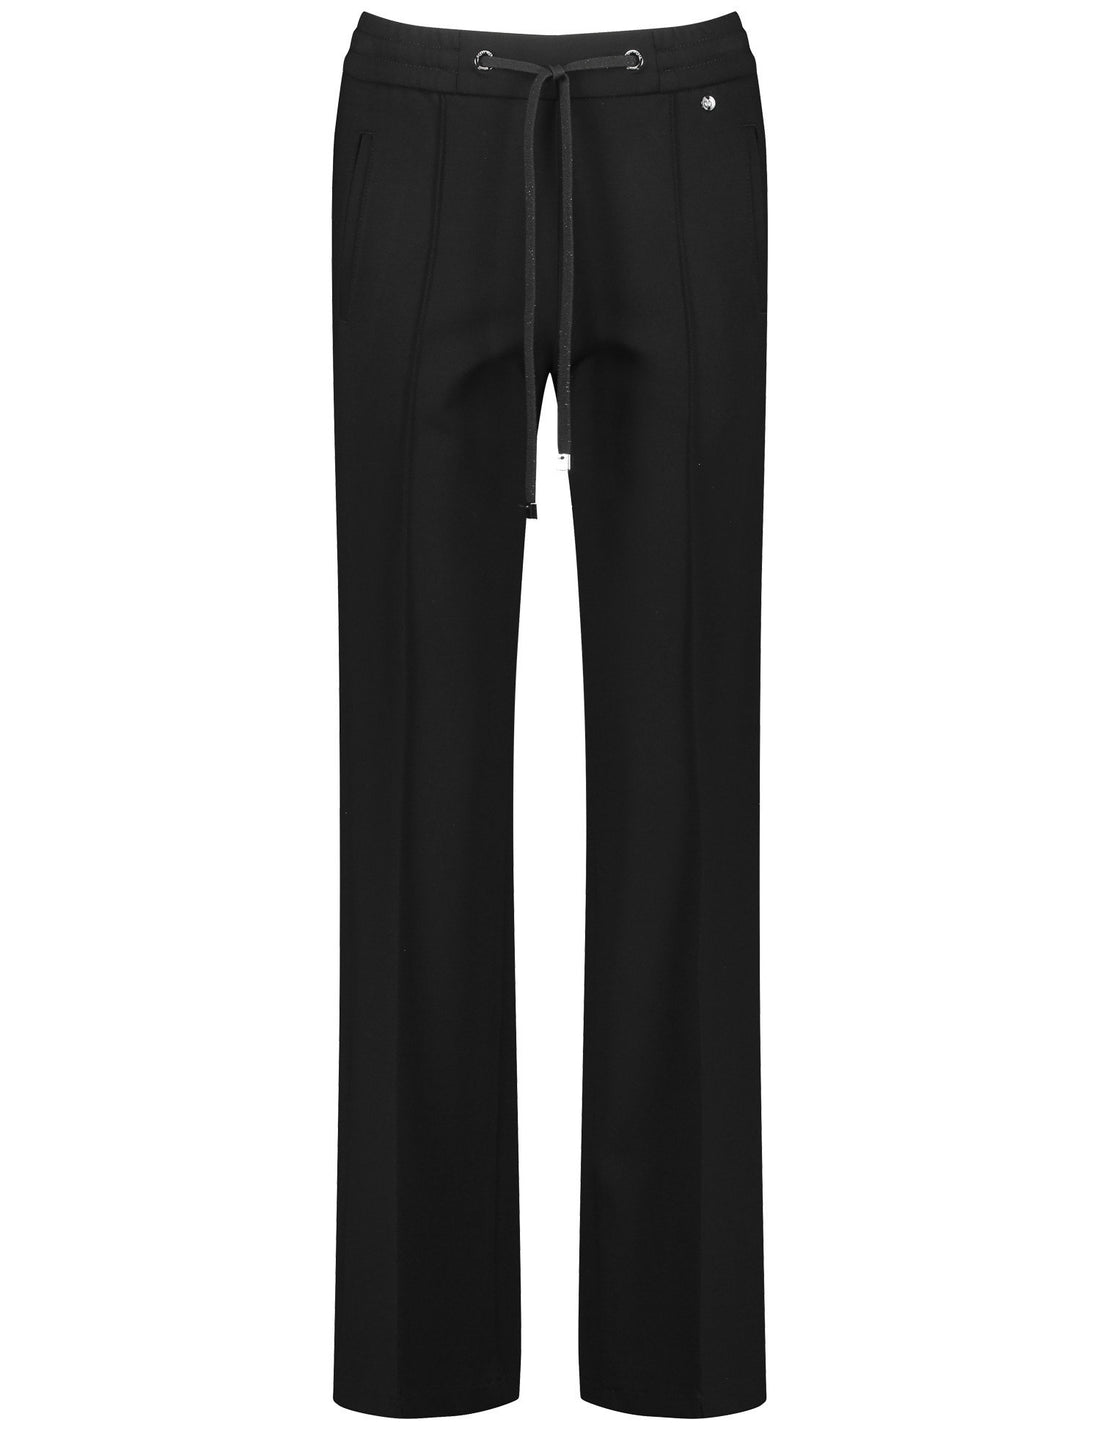 Fashionable Cloth Trousers With A Wide Leg, Vertical Pintucks And An Elasticated Waistband_122077-66211_11000_02